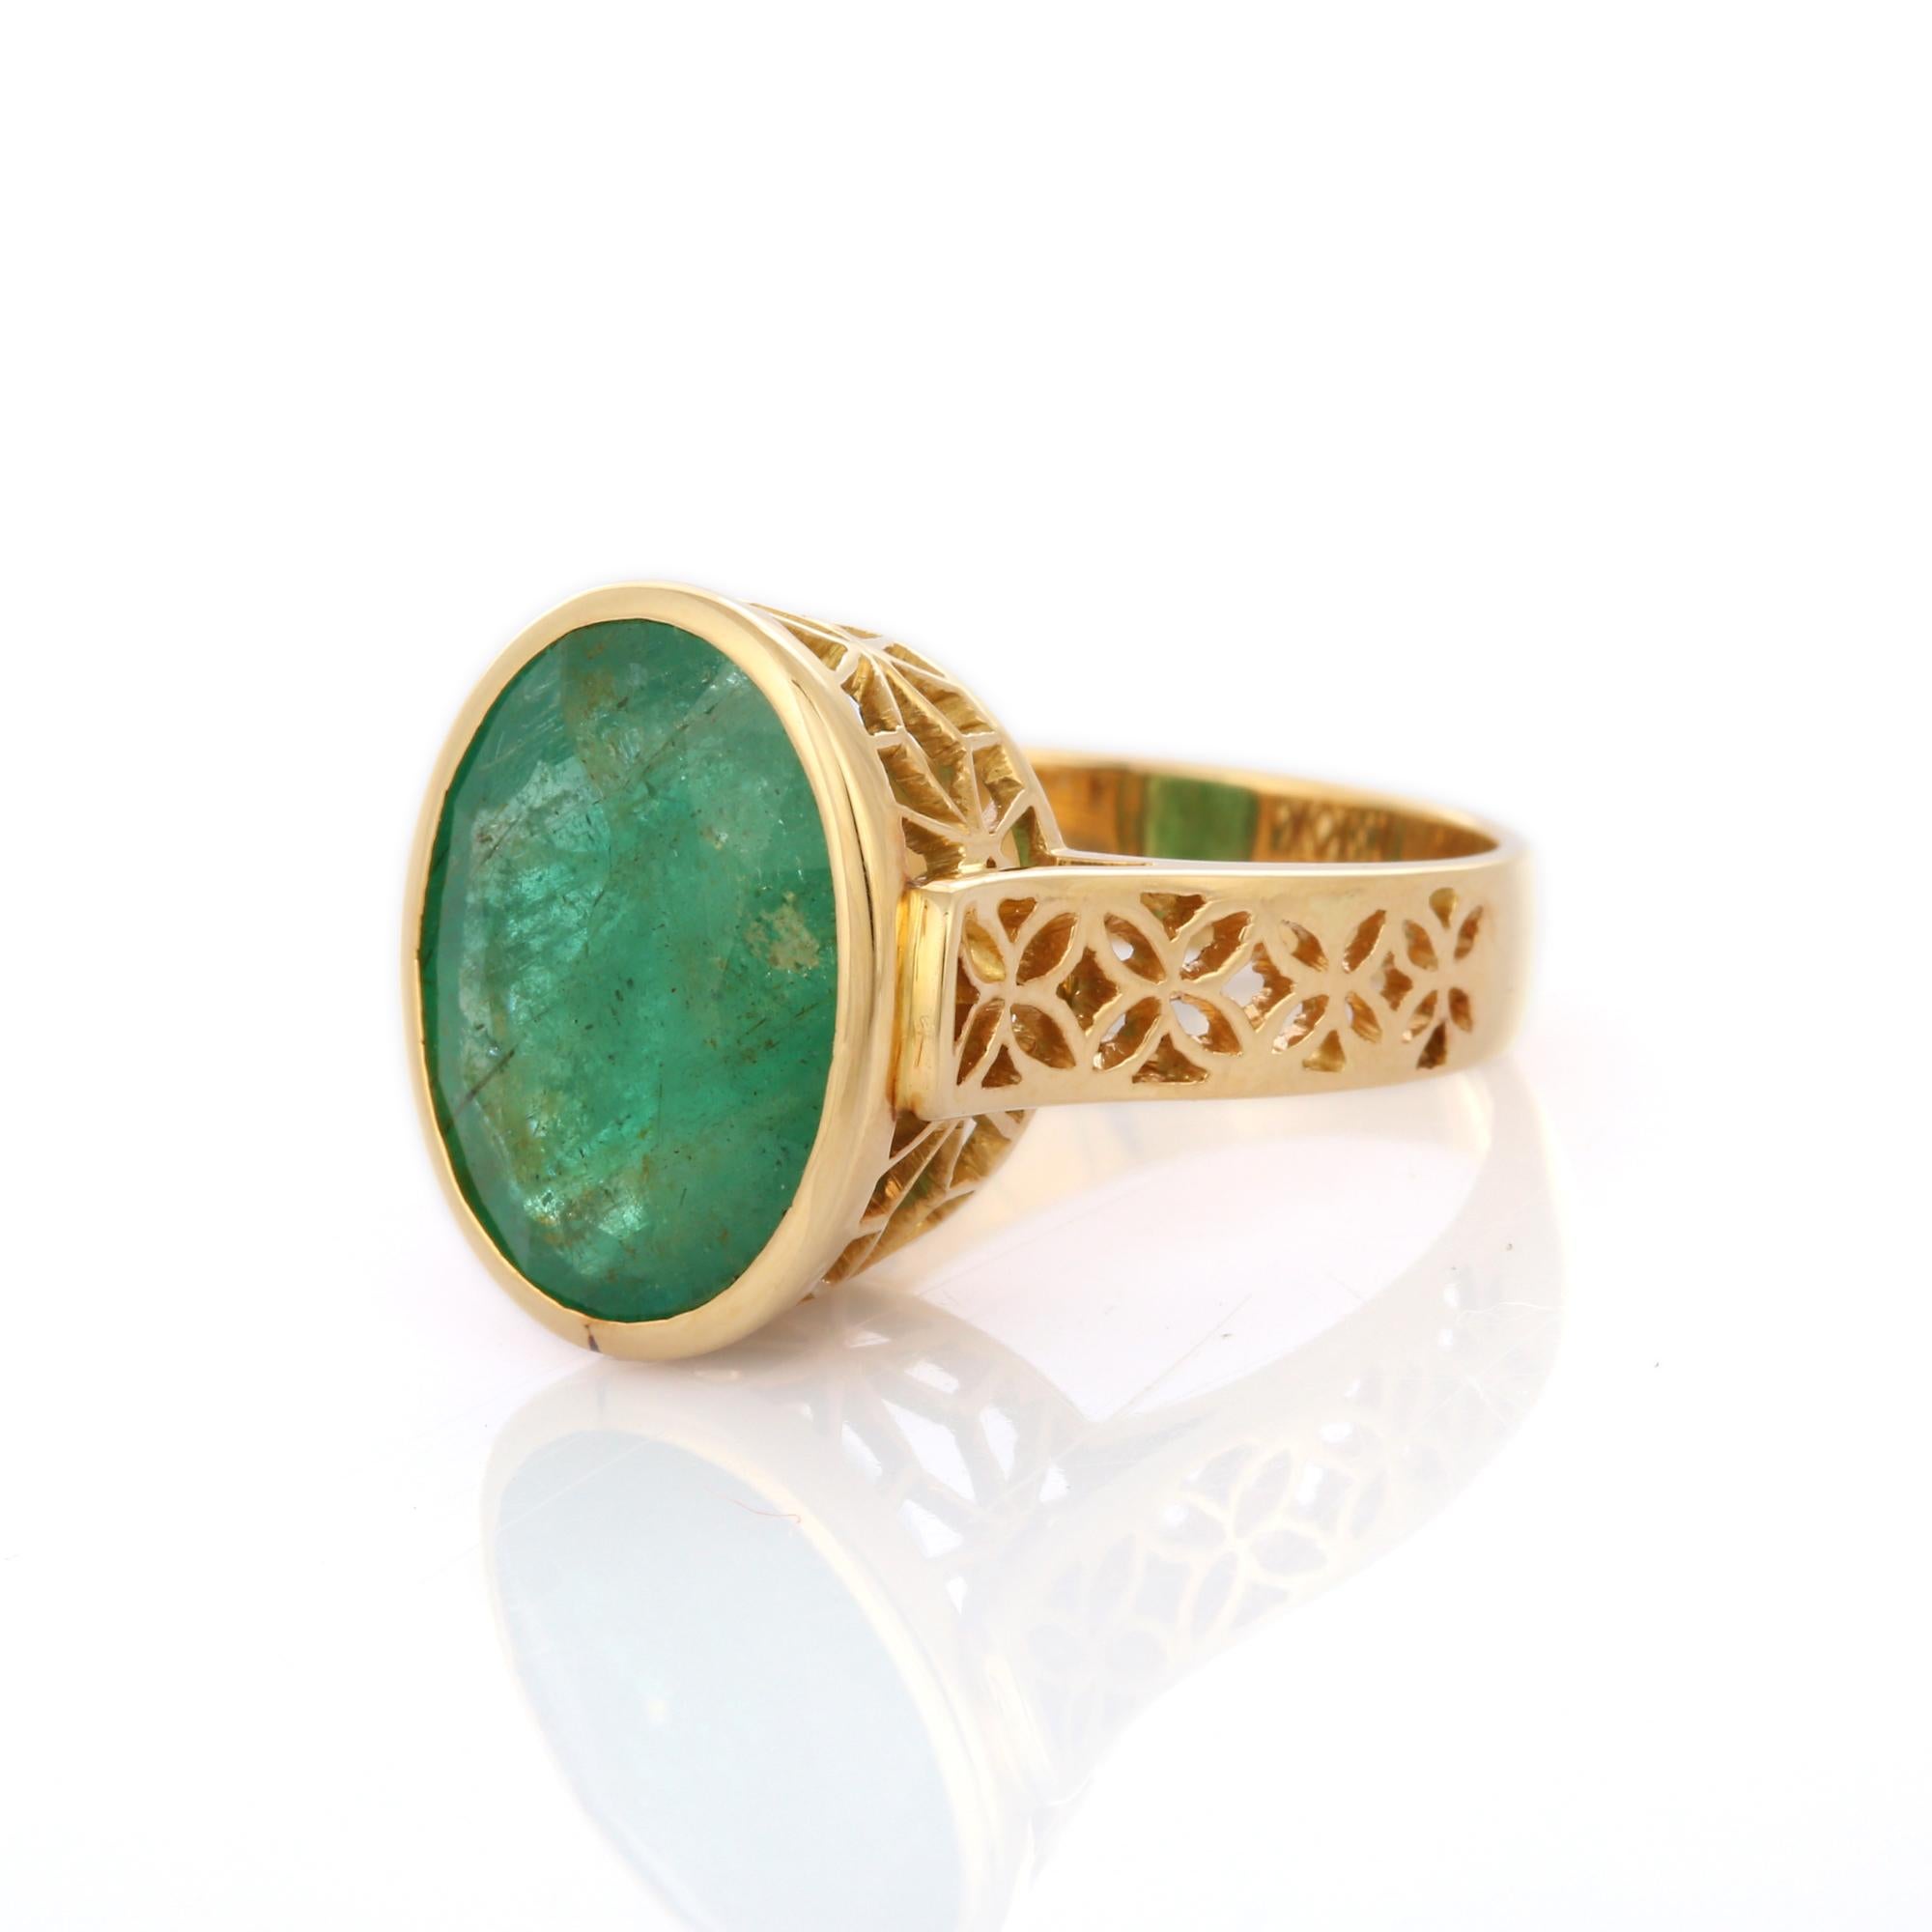 For Sale:  Natural Certified 7.76 Carats Emerald Ring in 18k Solid Yellow Gold 3